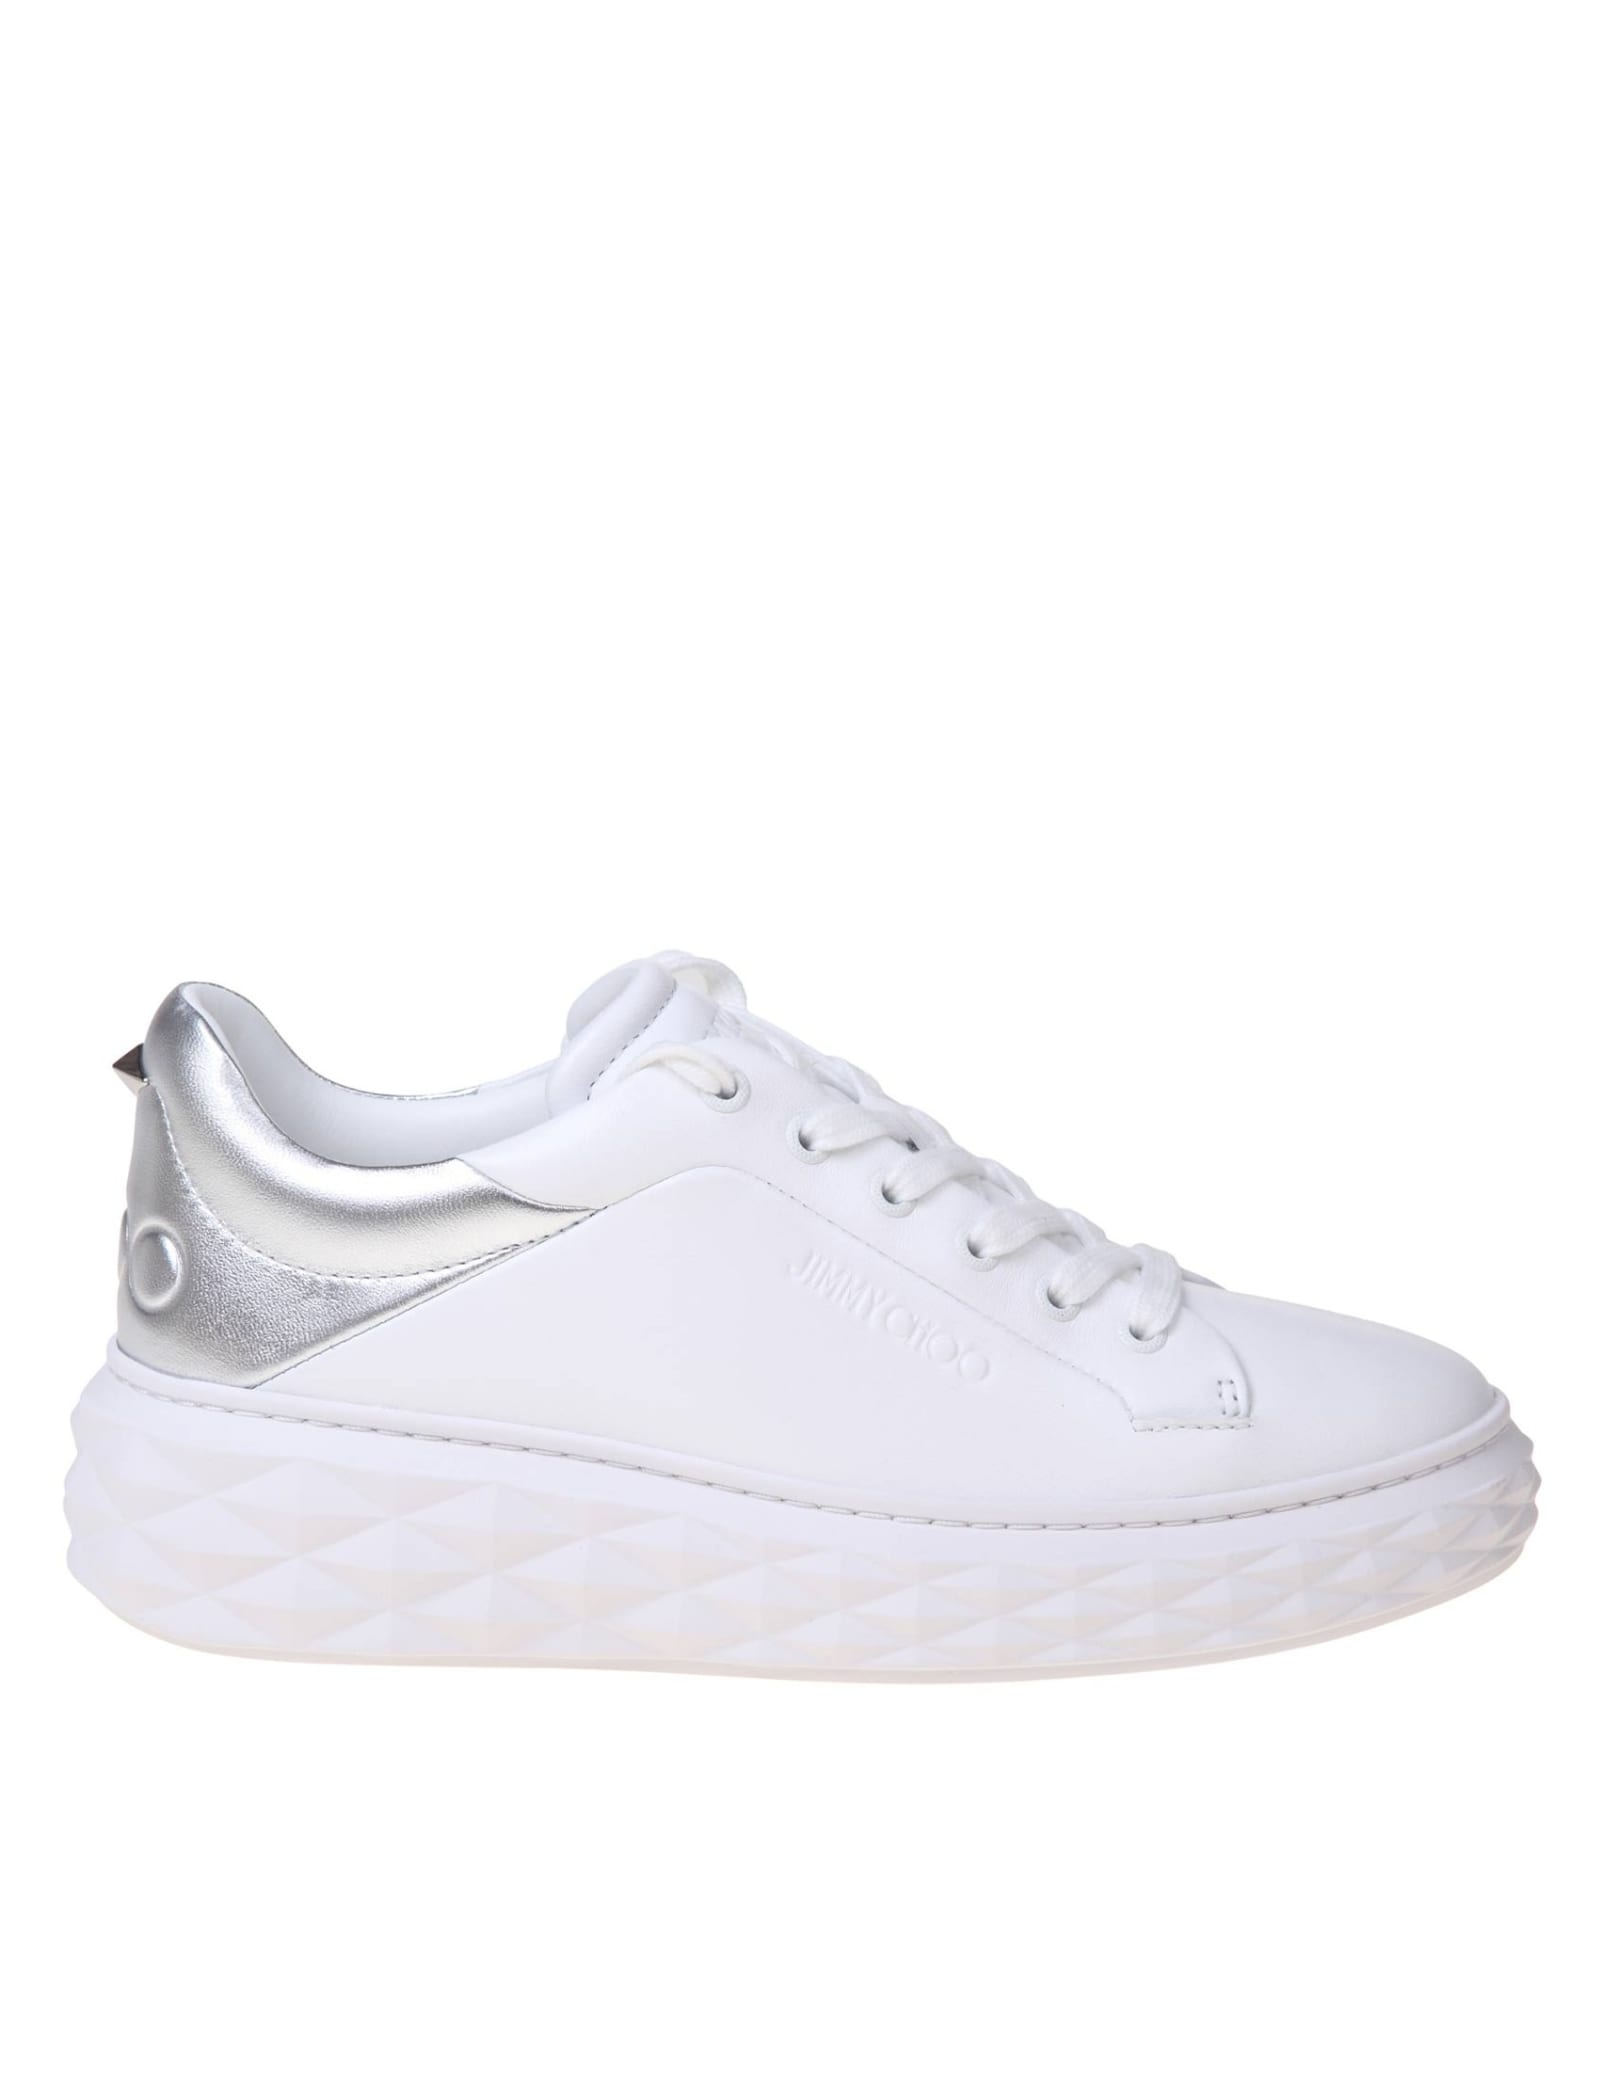 Shop Jimmy Choo Diamond Maxi Sneakers In White And Silver Leather